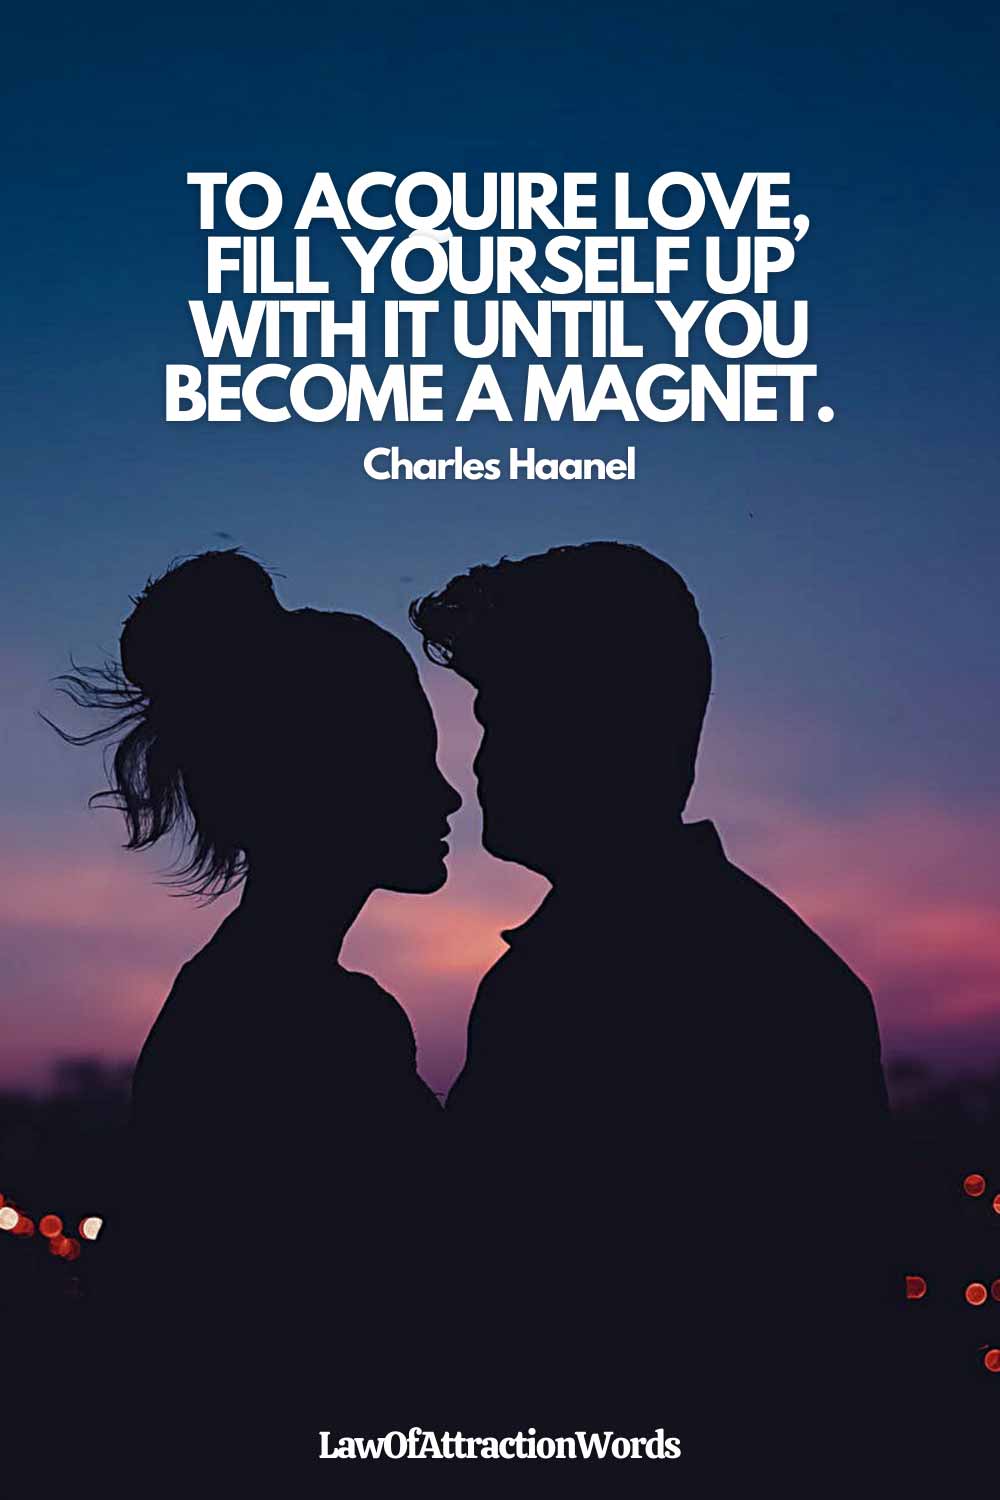 Best Law Of Attraction Quotes Love